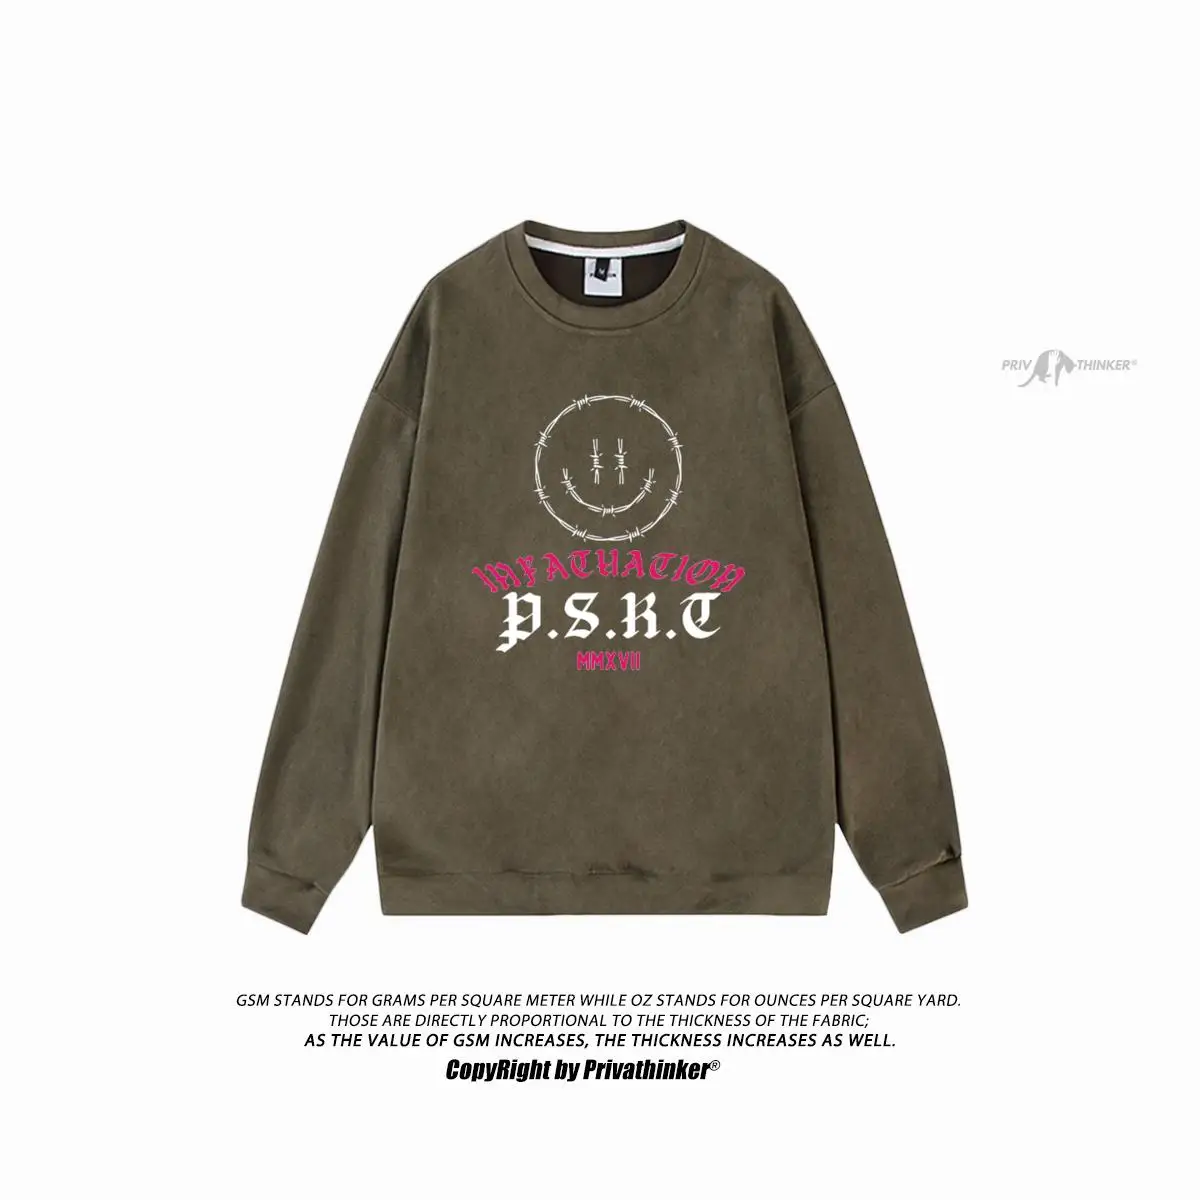 

Privathinker Gothic Style Graphic Sweatshirt Men/Women Hoodies Casual O-Neck Tops Harajuku Suede Tops Fashion Pullovers Xxl